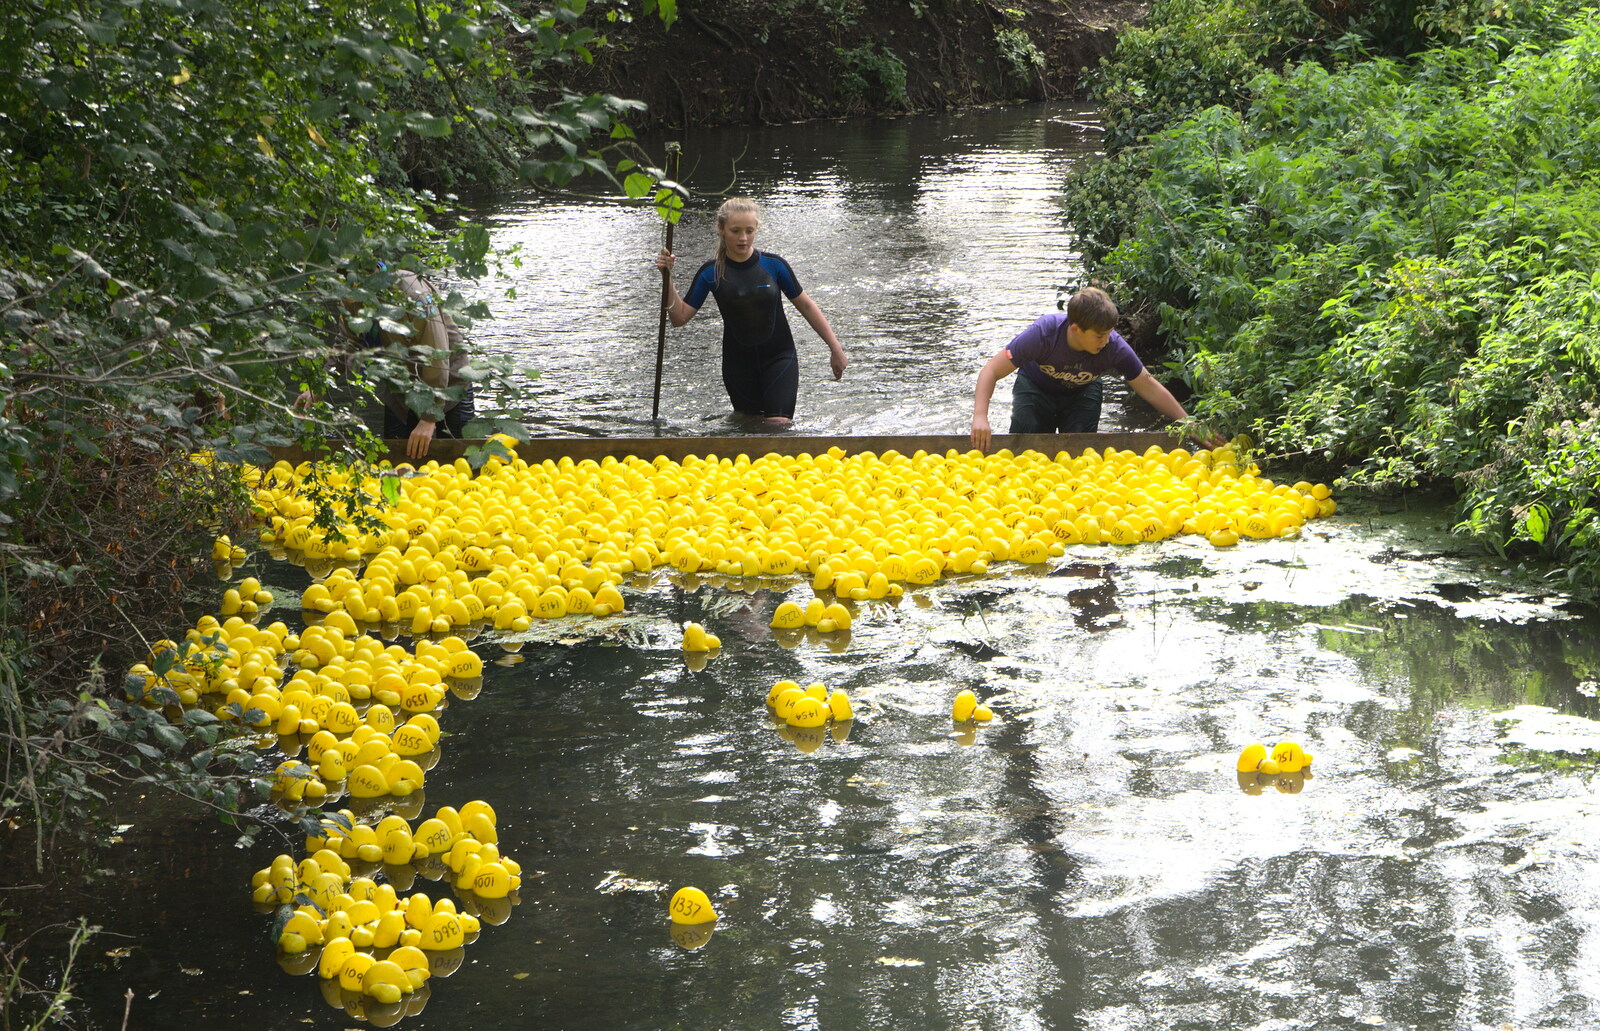 The ducks are helped along from The Eye Scouts Duck Race, The Pennings, Eye, Suffolk - 24th September 2016